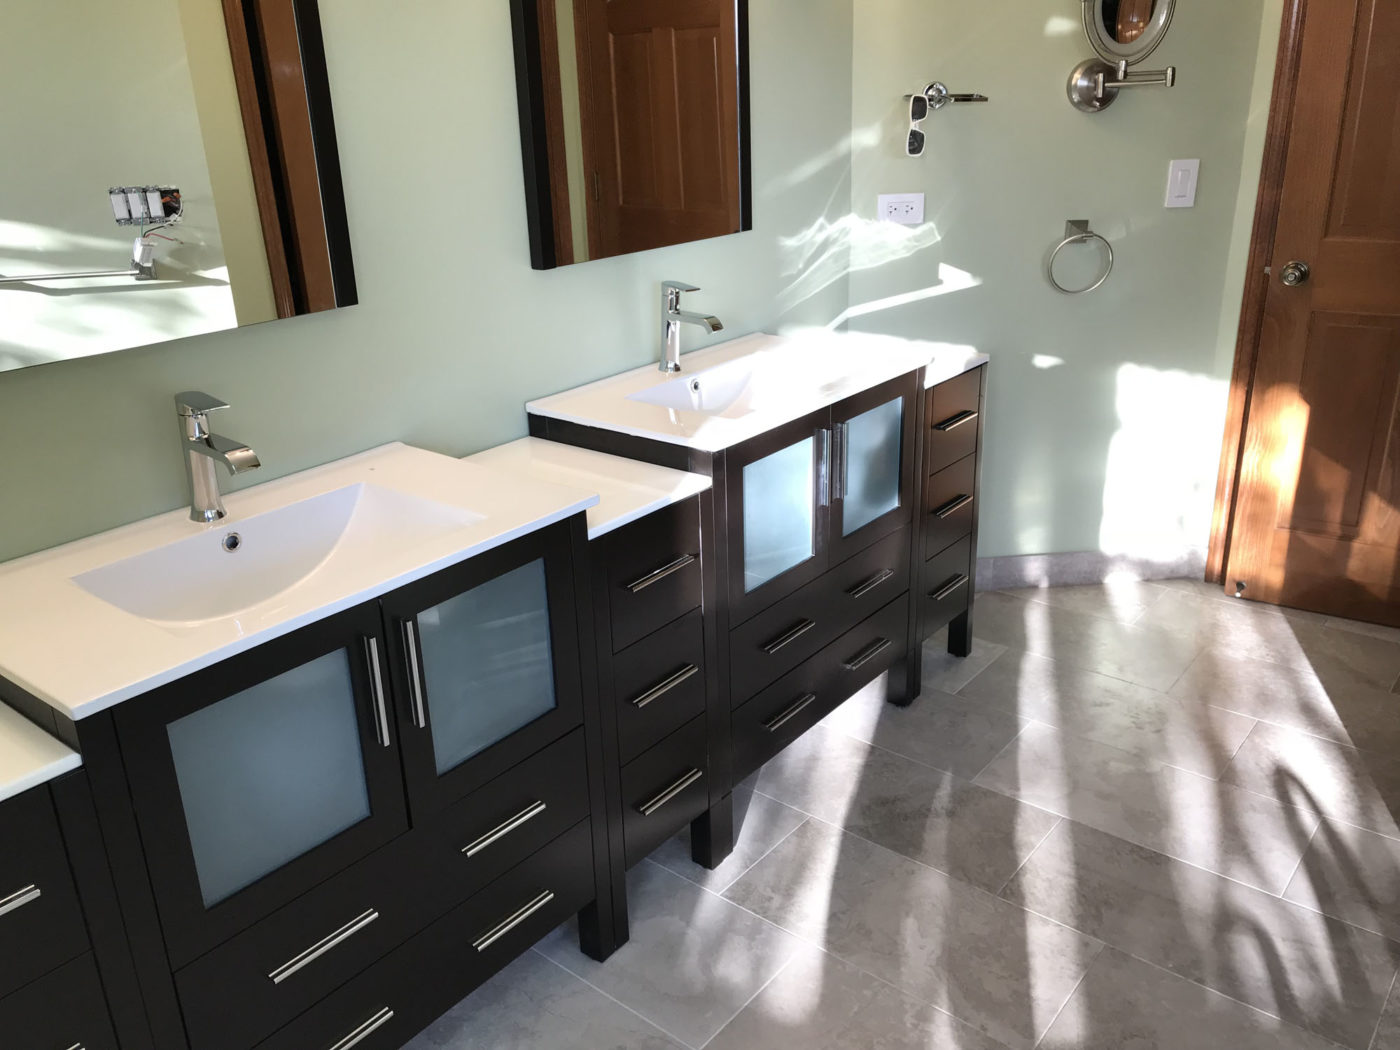 Master Bathroom Remodeling In Hoffman Estates - new cabinets and countertops